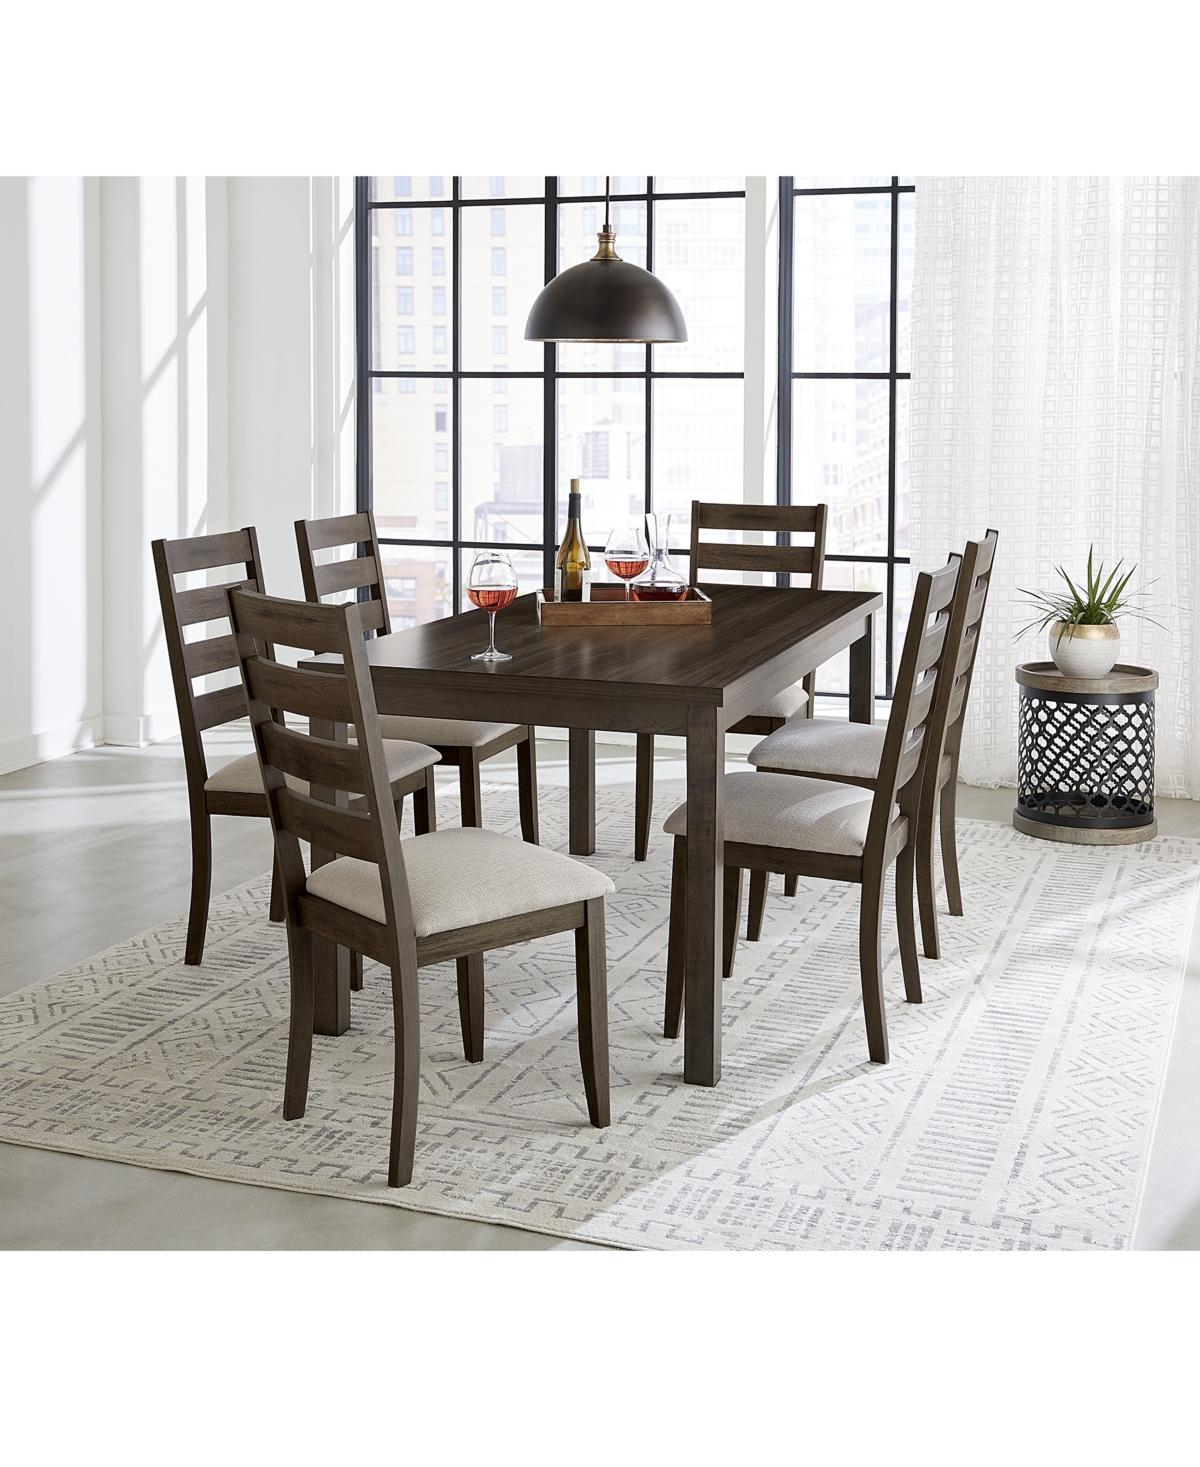 Macy's Closeout! Max Meadows Laminate 7-pc Dining Set (rectangular Trestle Table + 6 Side Chairs) In Dark Brown